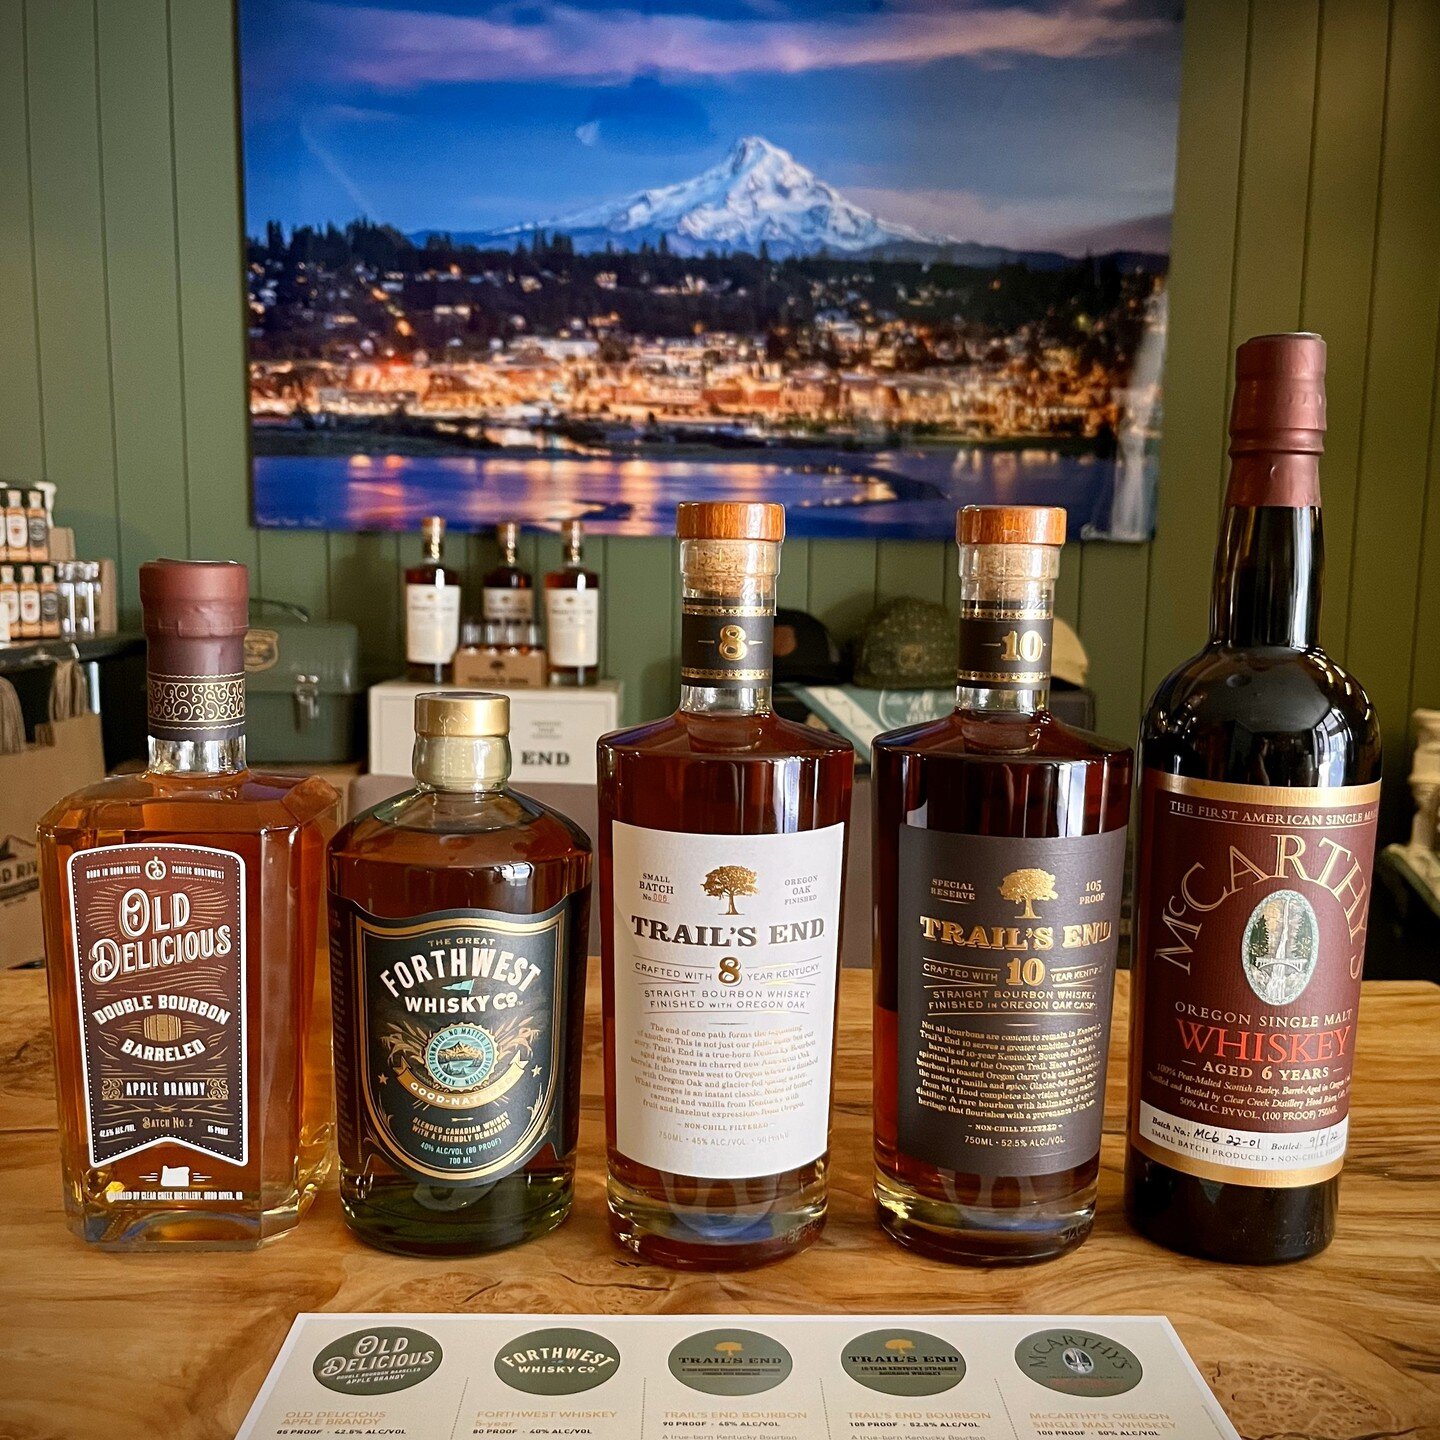 West End Wednesday is back at the Portland Tasting Outpost next Wednesday, February 28th.
$5 off Tasting Flights from 5-7pm!
#westendwednesday #downtownpdx #spiritstasting #hoodriverdistillers #whiskey #brandy #vodka #gin #liqueurs